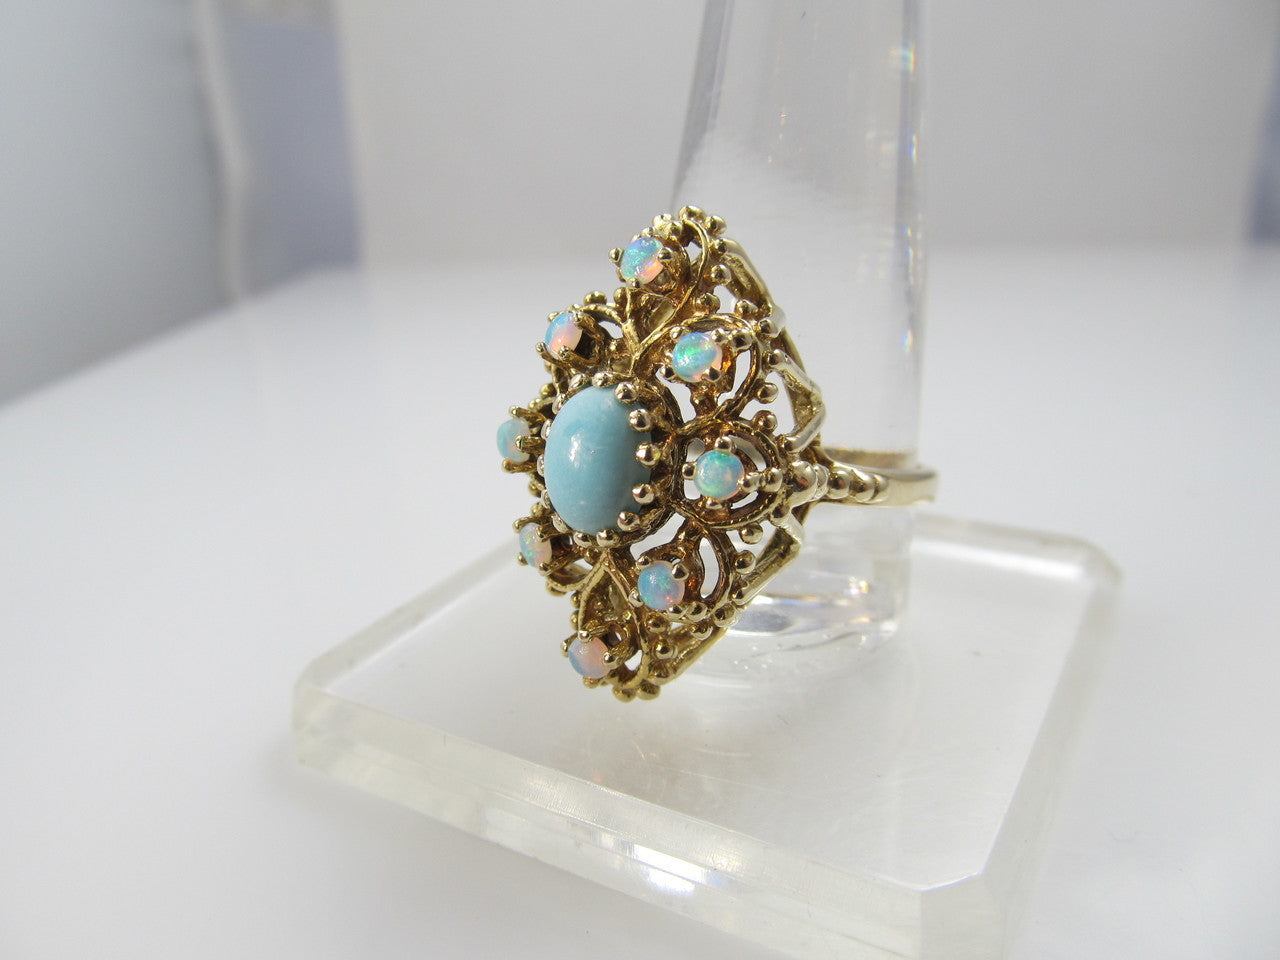 Vintage 14k Gold Ring With Opals And Turquoise